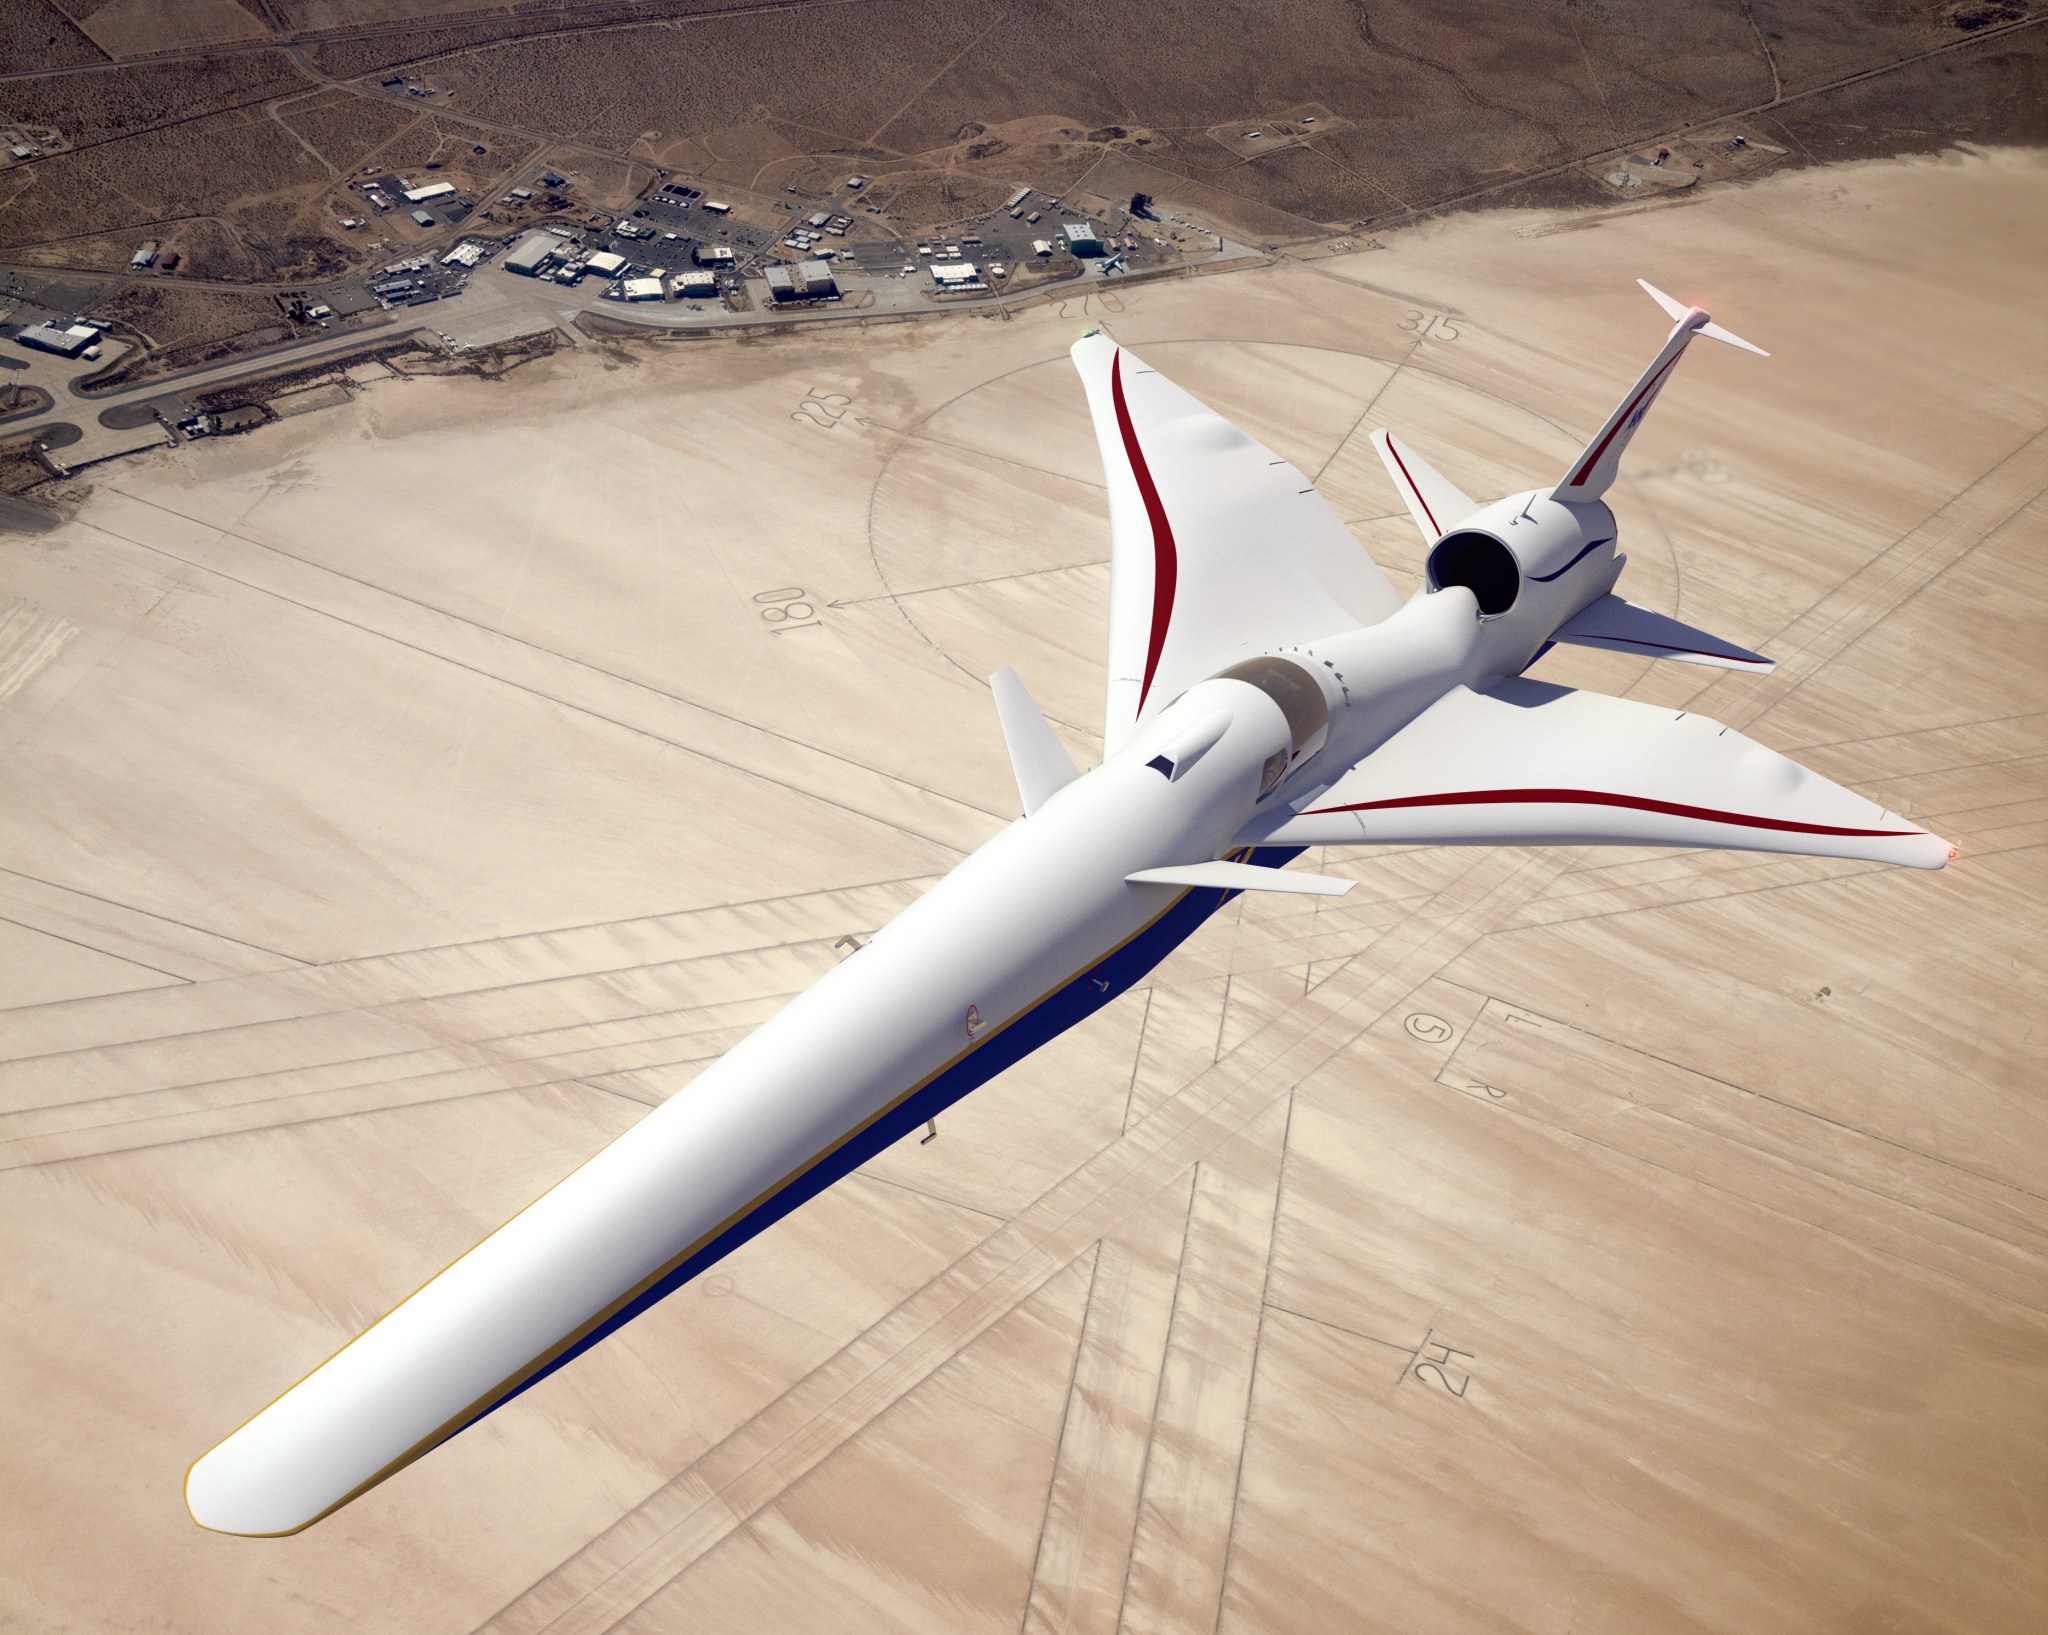 Illustration of the X-59 QueSST as it flies above NASA's Armstrong Flight Research Center in California.